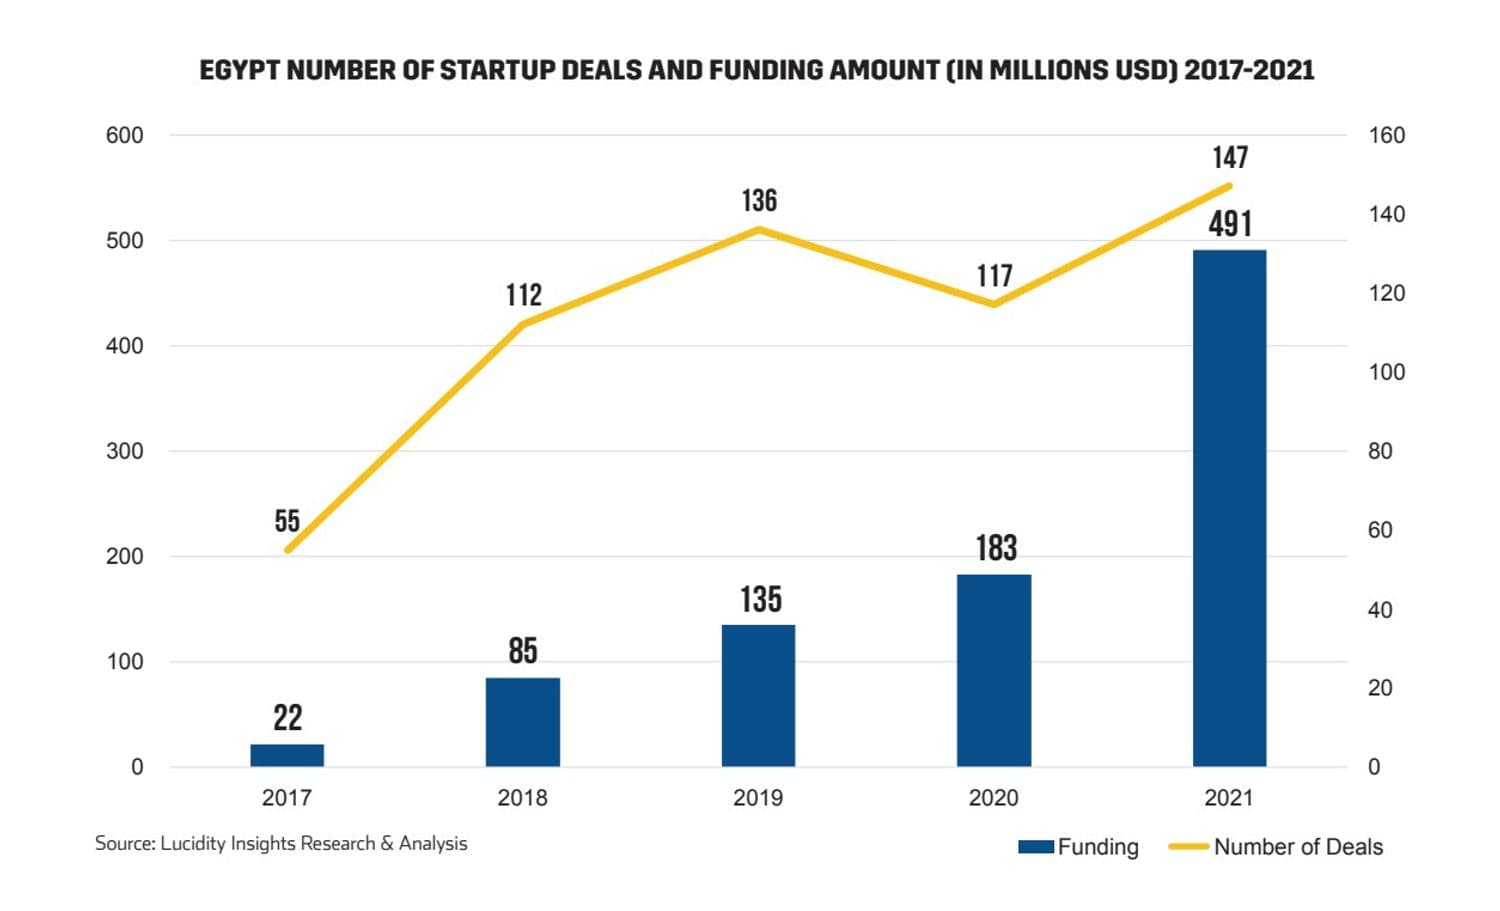 Egypt Number of Startup Deals and Funding Amount 2017-2021